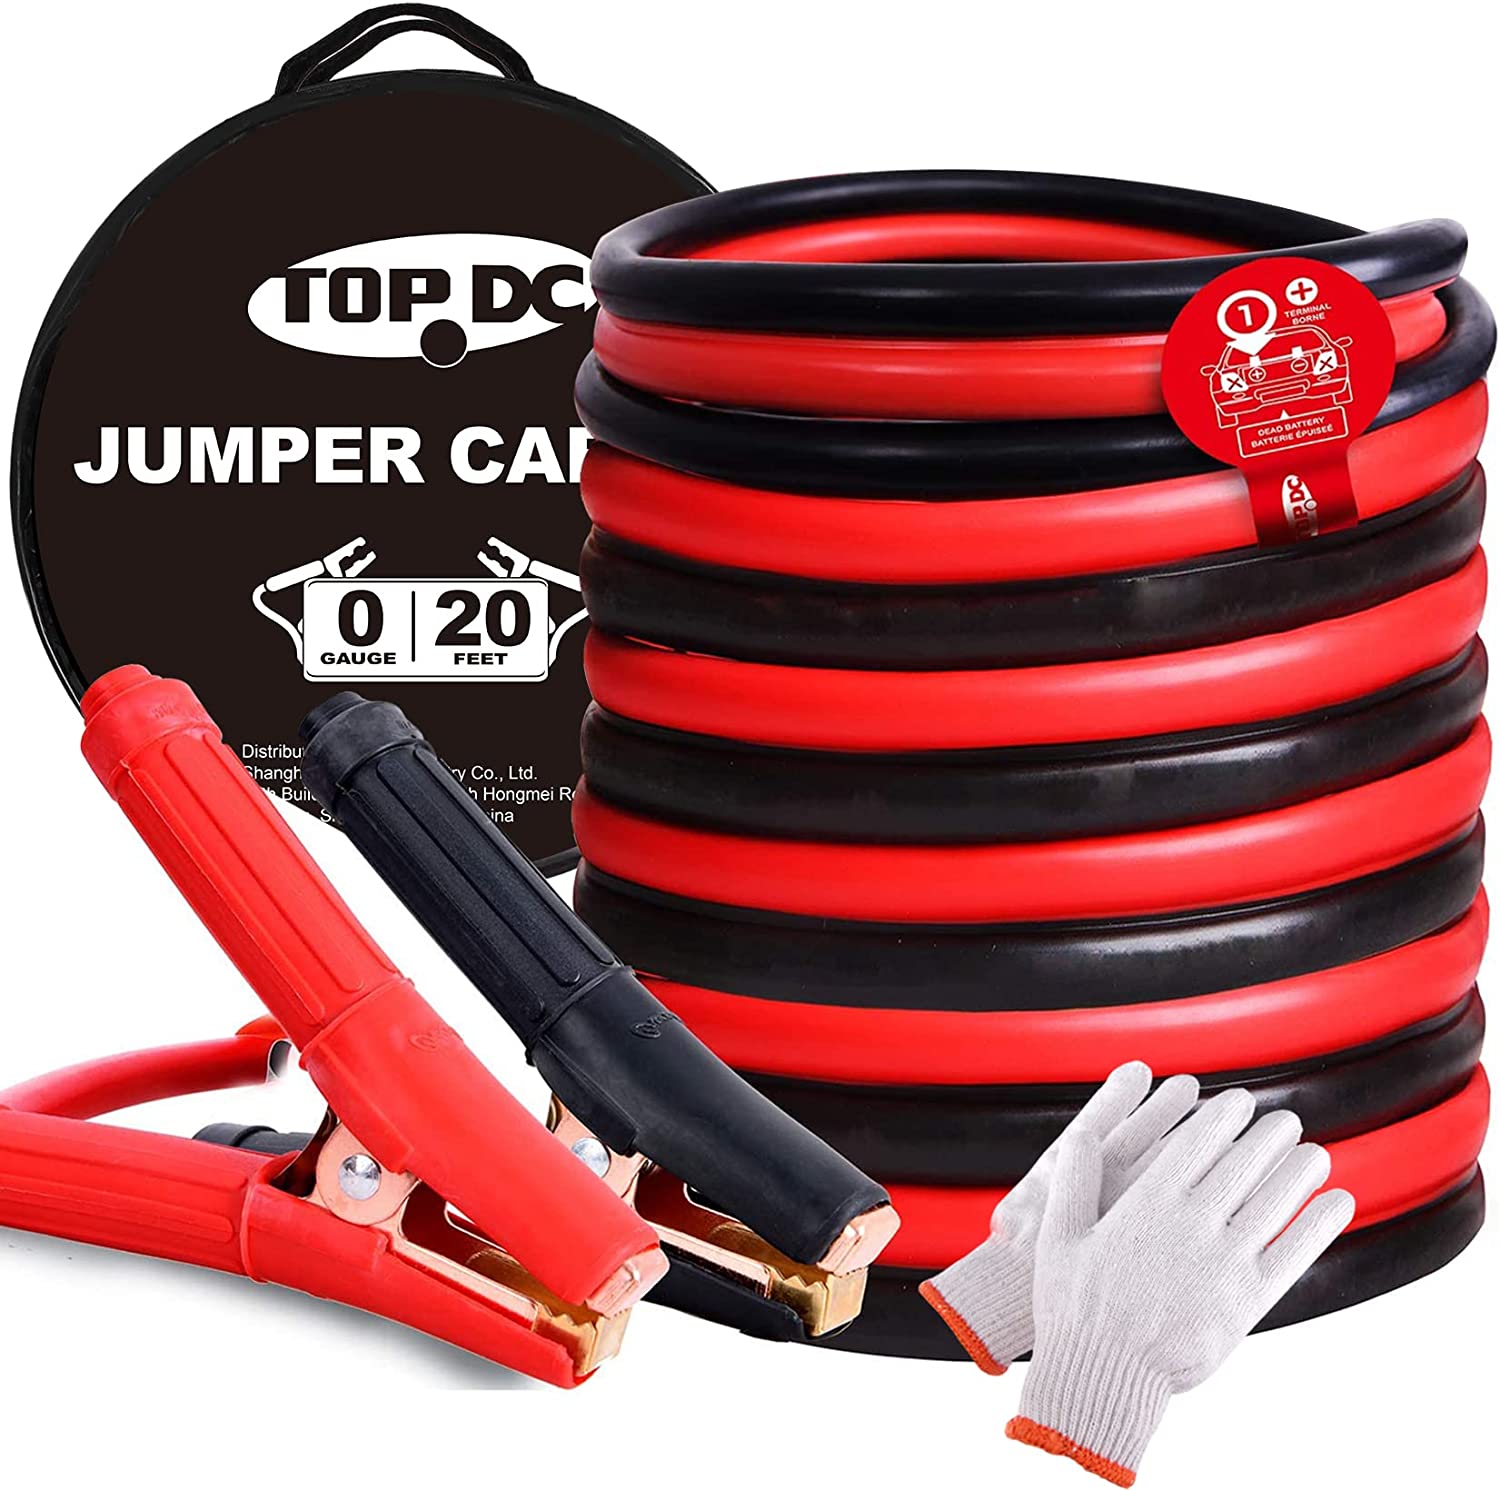 TOPDC 0 Gauge 20 Feet Jumper Cables for Car, SUV and [...]